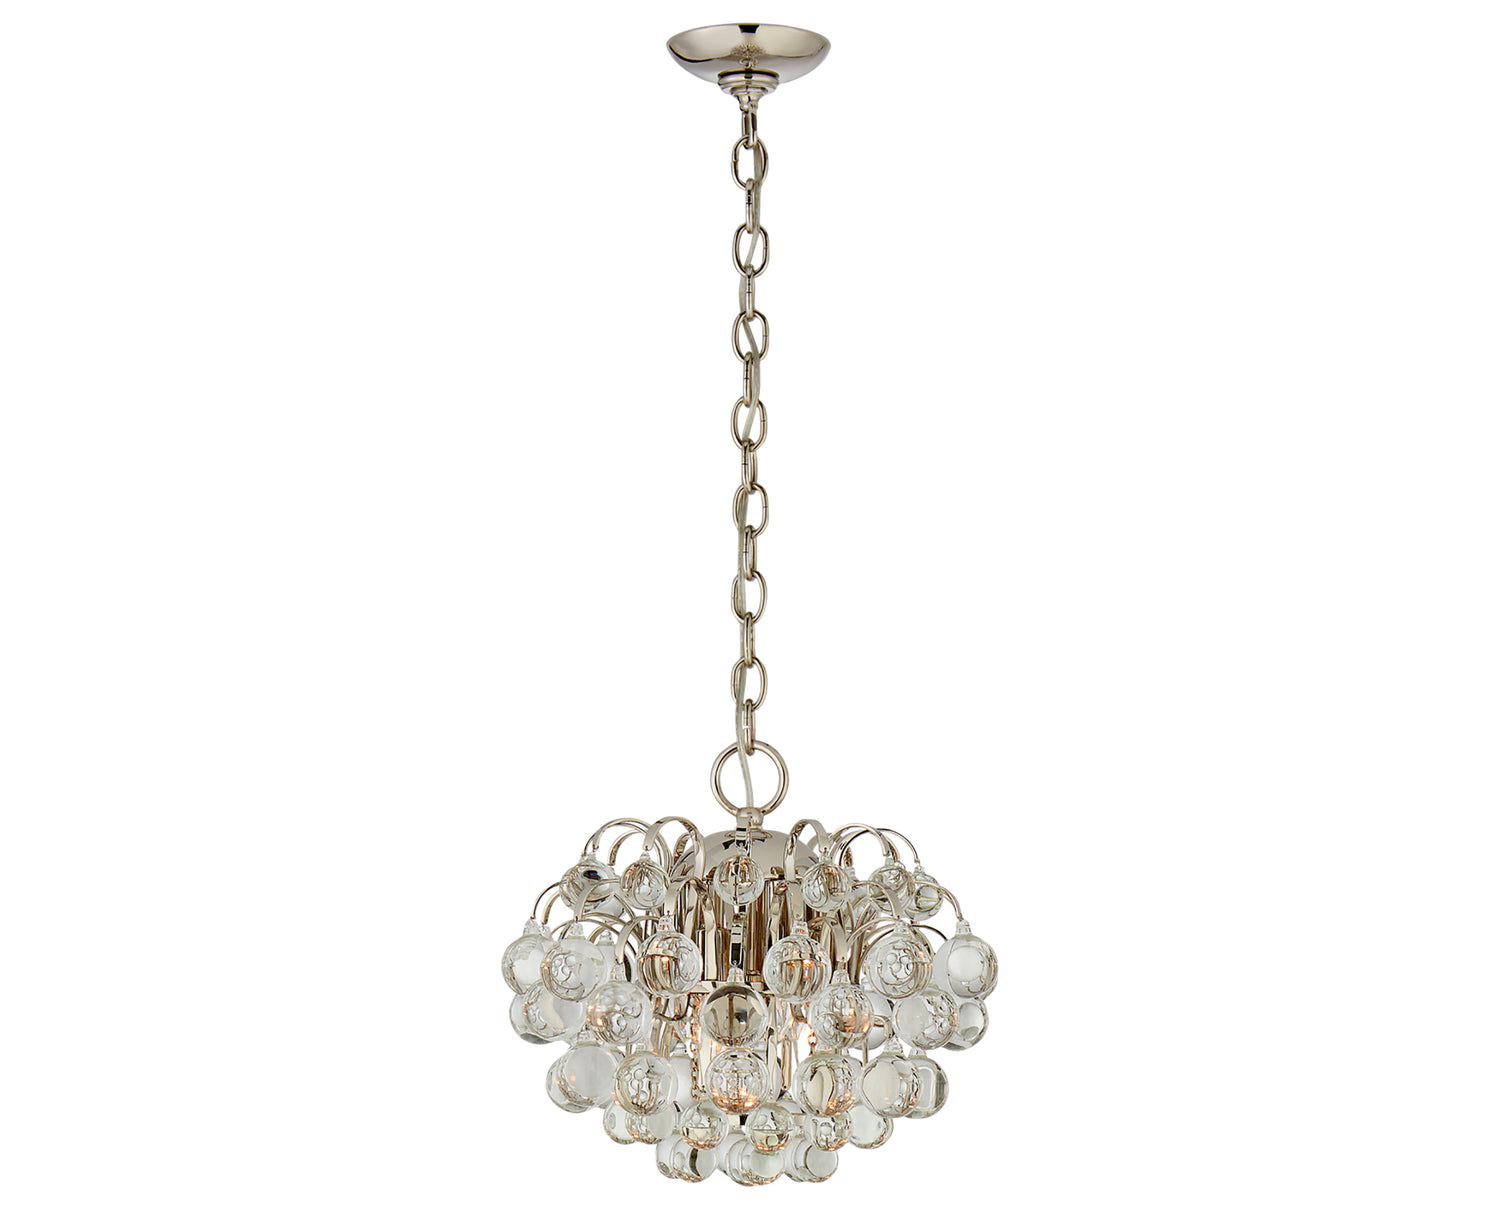 Polished Nickel & Crystal Glass | Bellvale Small Chandelier | Valley Ridge Furniture